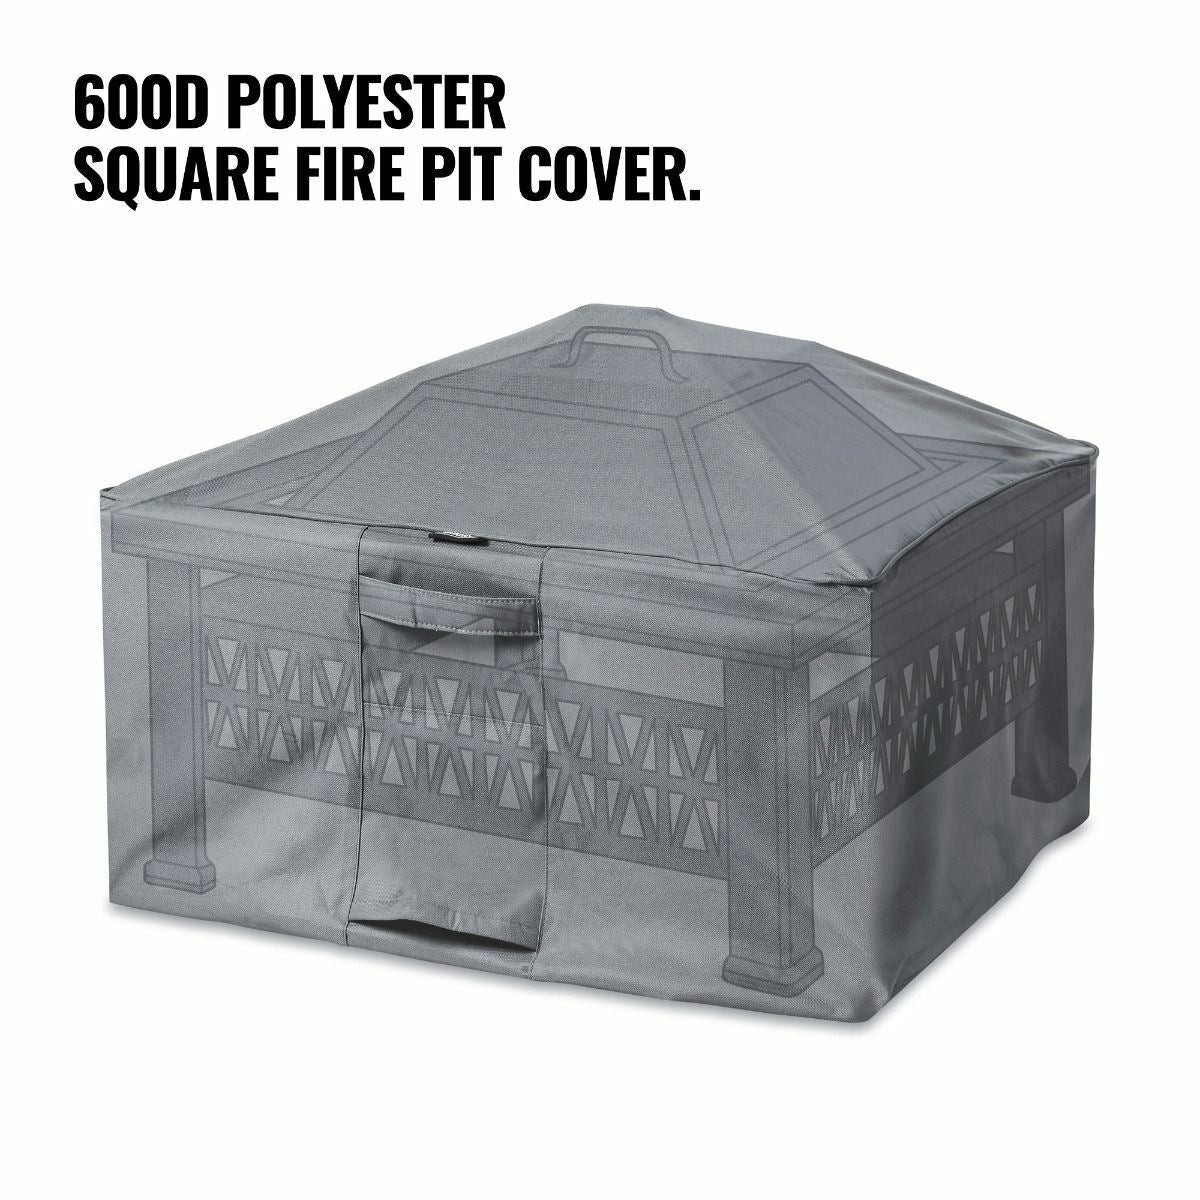 Square Fire Pit Cover